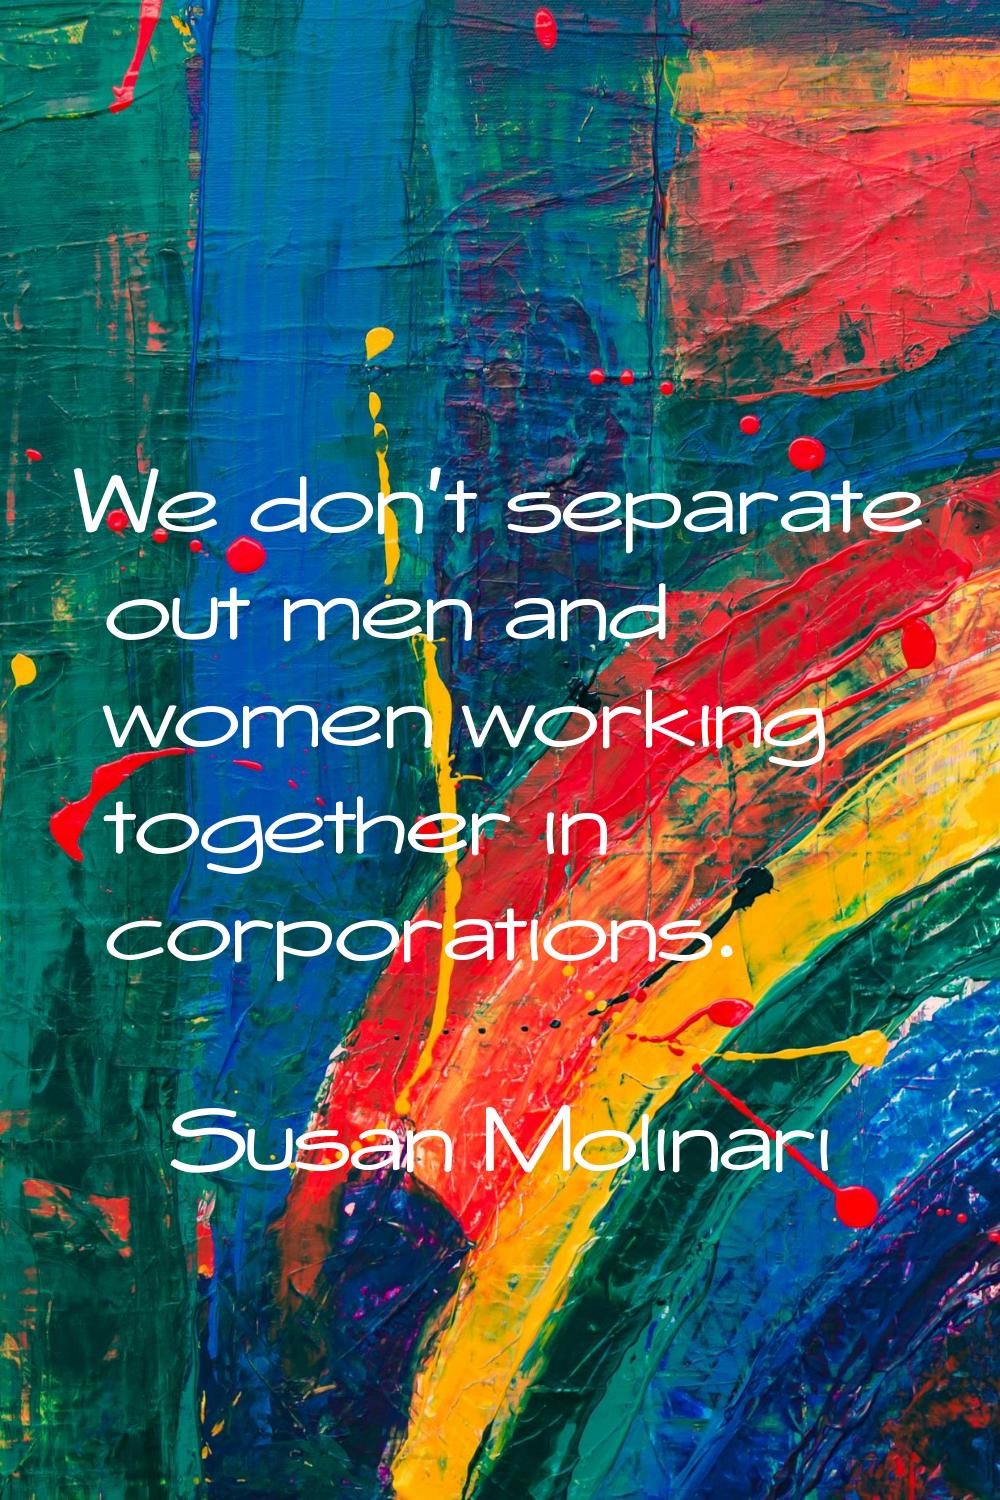 We don't separate out men and women working together in corporations.